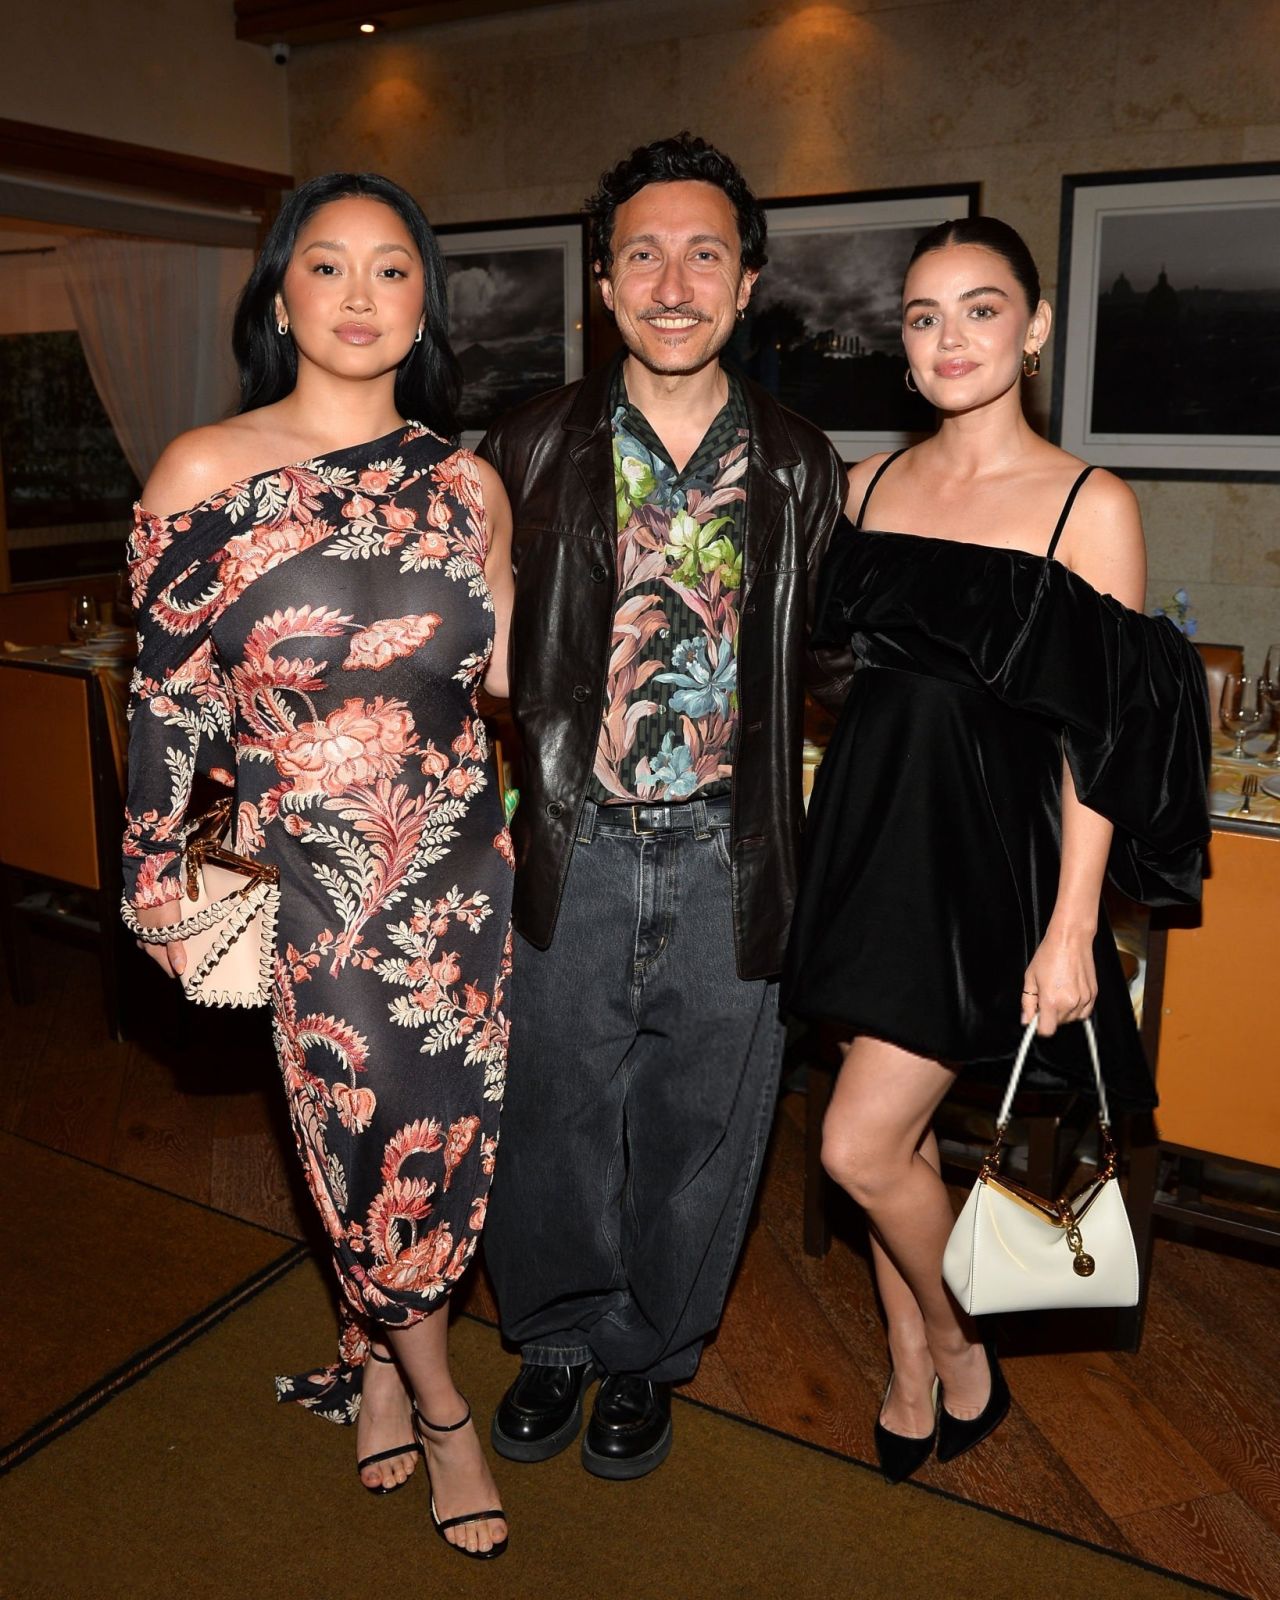 LUCY HALE AT ETRO DINNER LOS ANGELES AT IL SEGRETO RISTORANTE BELAIR IN LOS ANGELES6